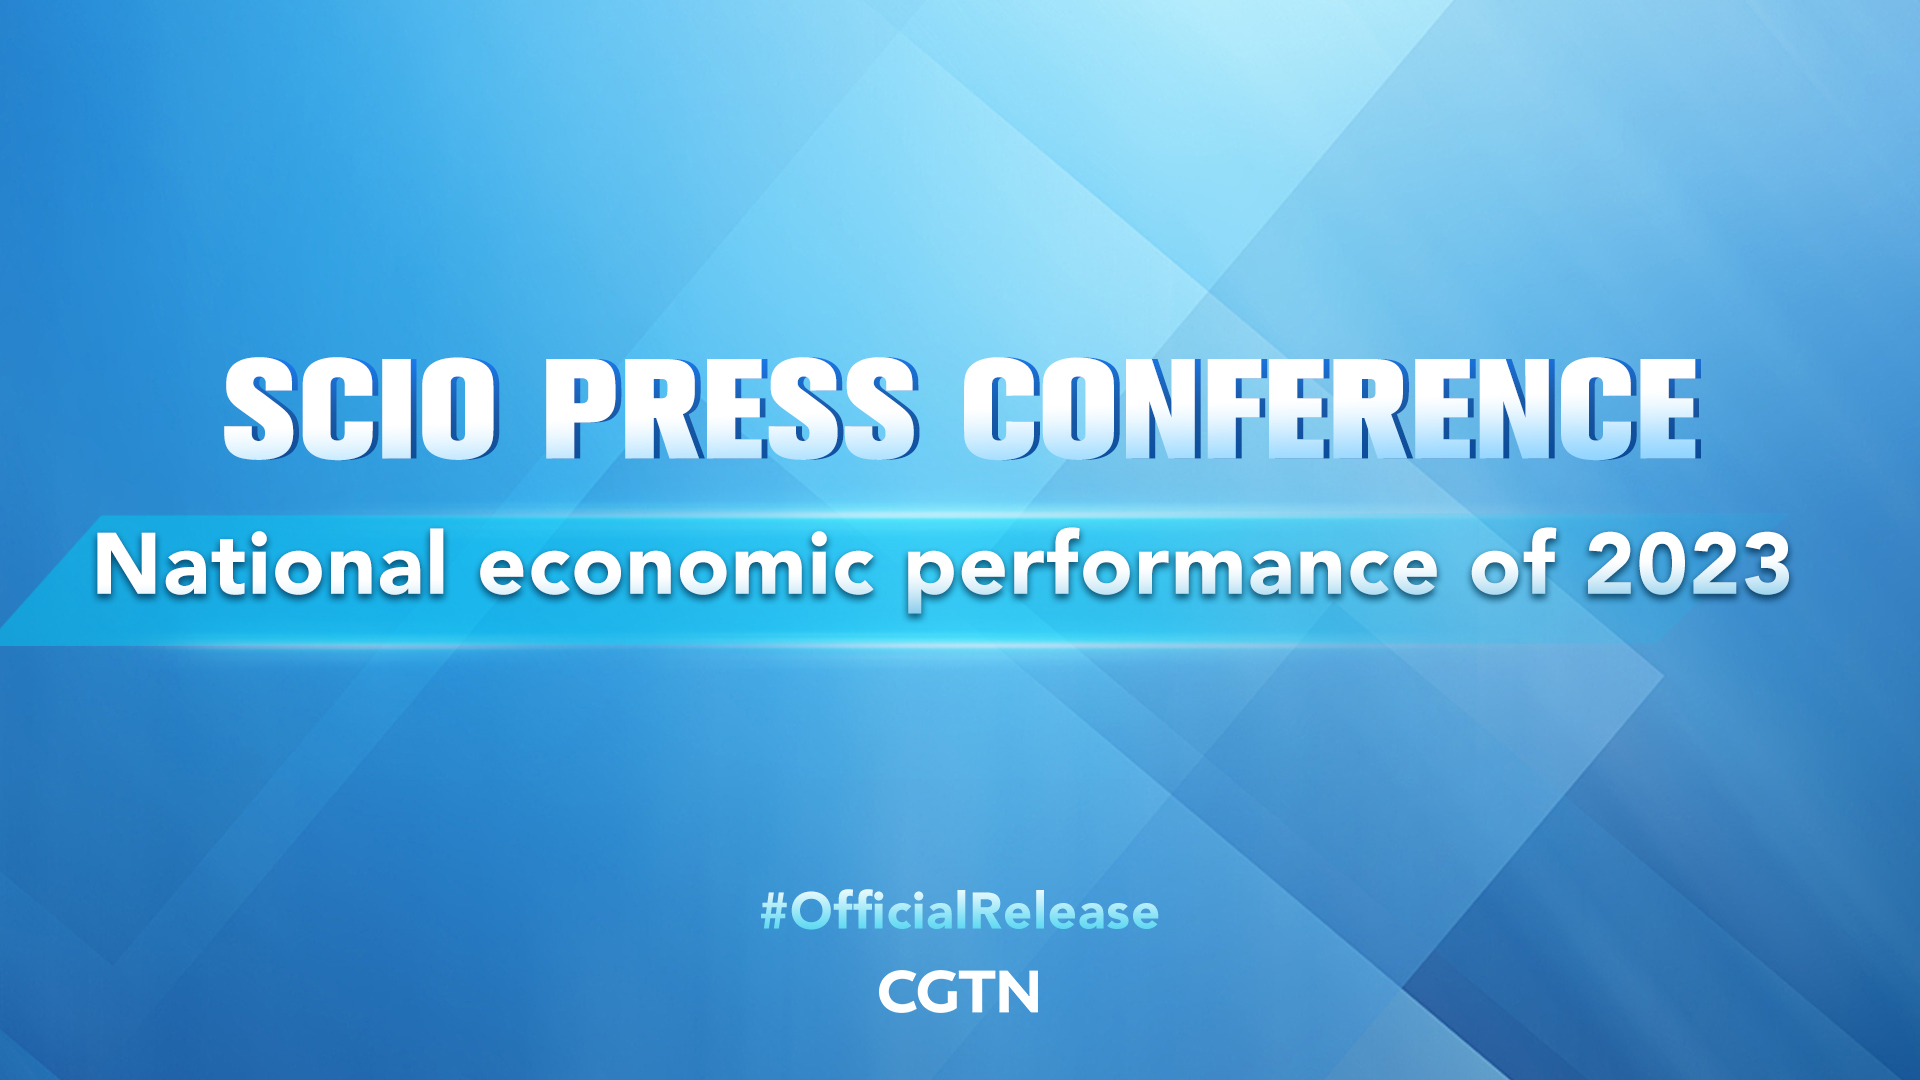 Live: Press conference on national economic performance of 2023